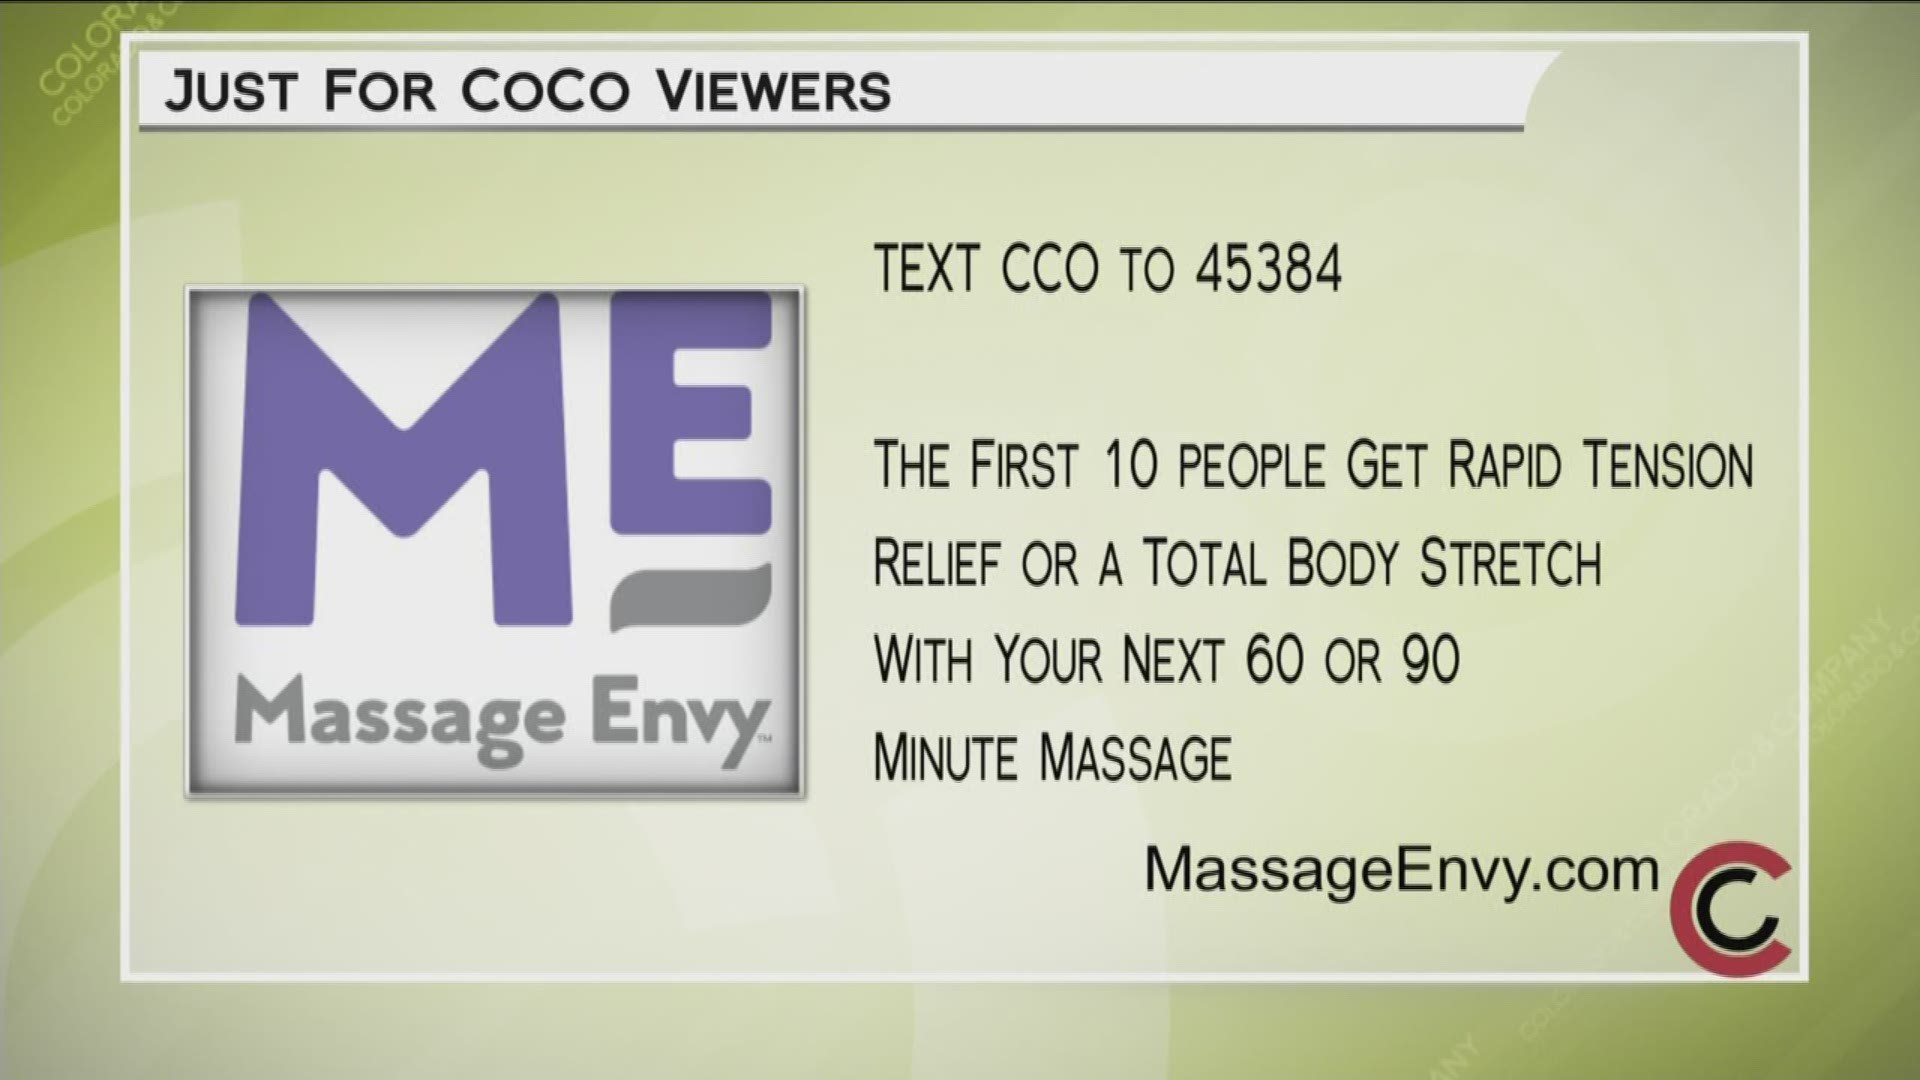 Massage Envy is the place for all over wellness. Learn more at www.MassageEnvy.com.